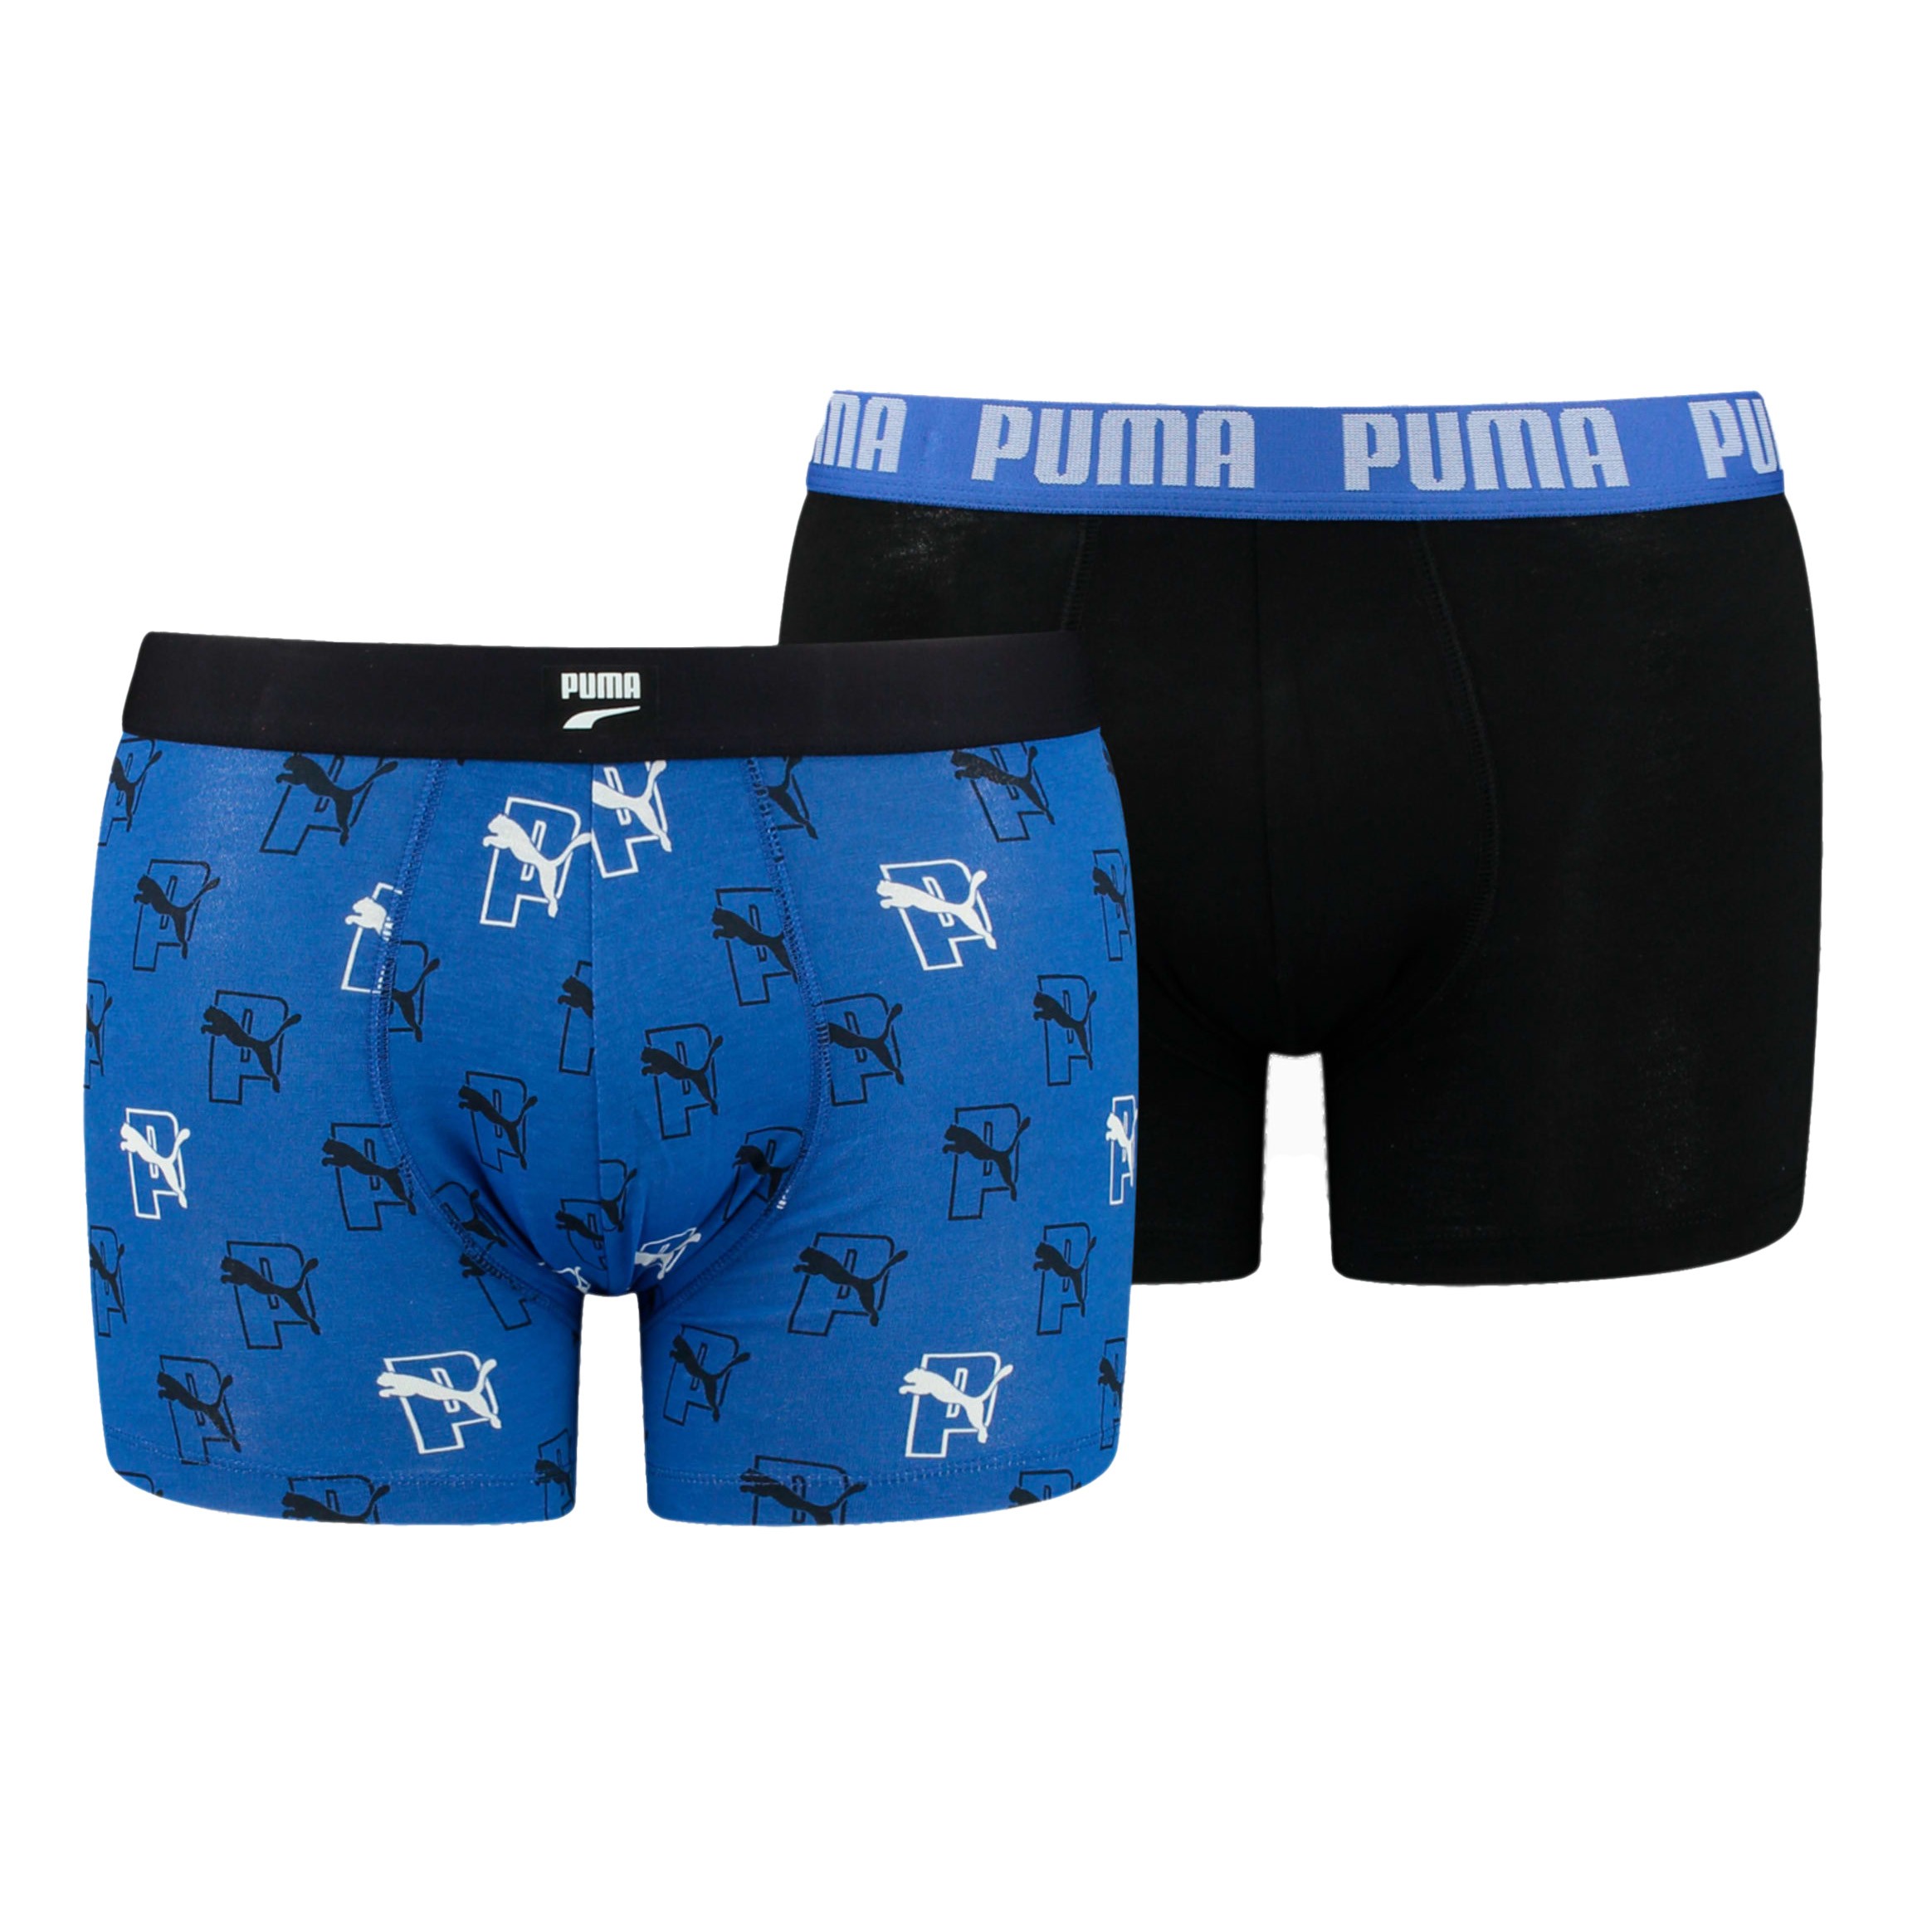 PUMA Placed Logo Men's Boxers 2 Pack